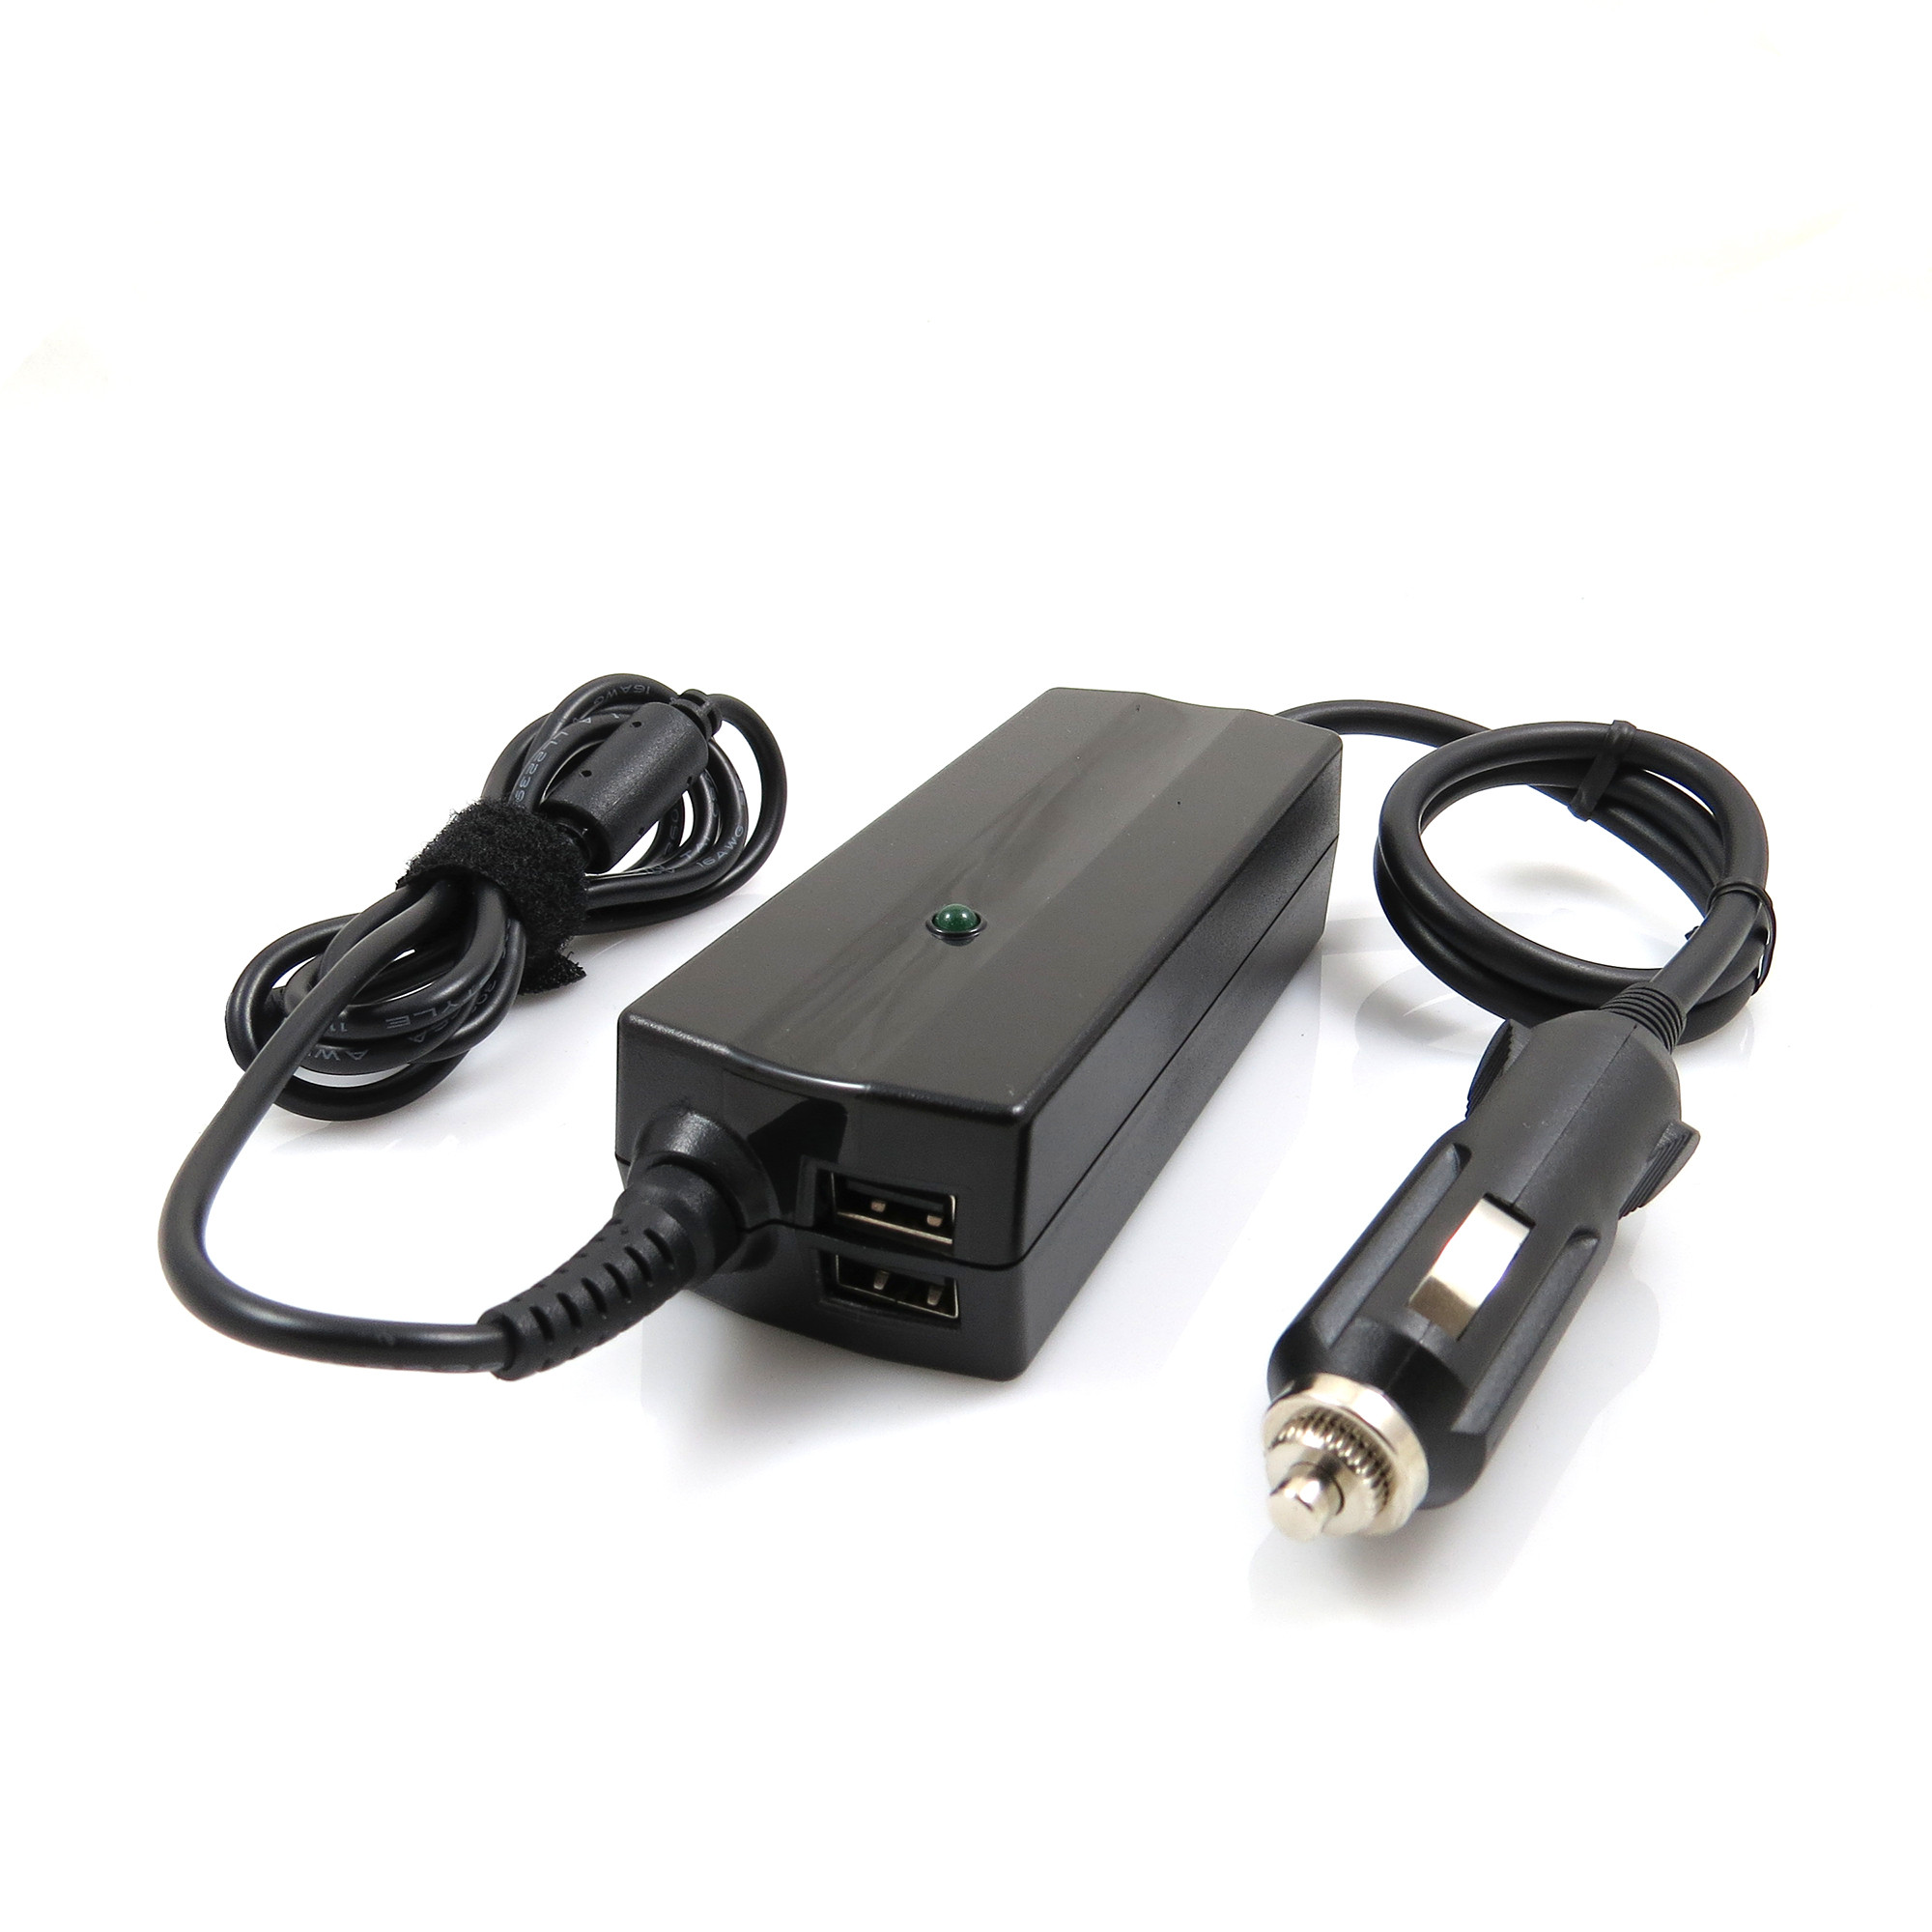 Car Charger for Panasonic Toughbook Cf-w4 Cf-w5 Cf-y2 Cf-y4 Cf-y5 Cf-28 Cf-29 Cf-30 Cf-31 Cf-50 Cf-51 Cf-52 Cf-73 Battery Power Supply Cord - image 2 of 2